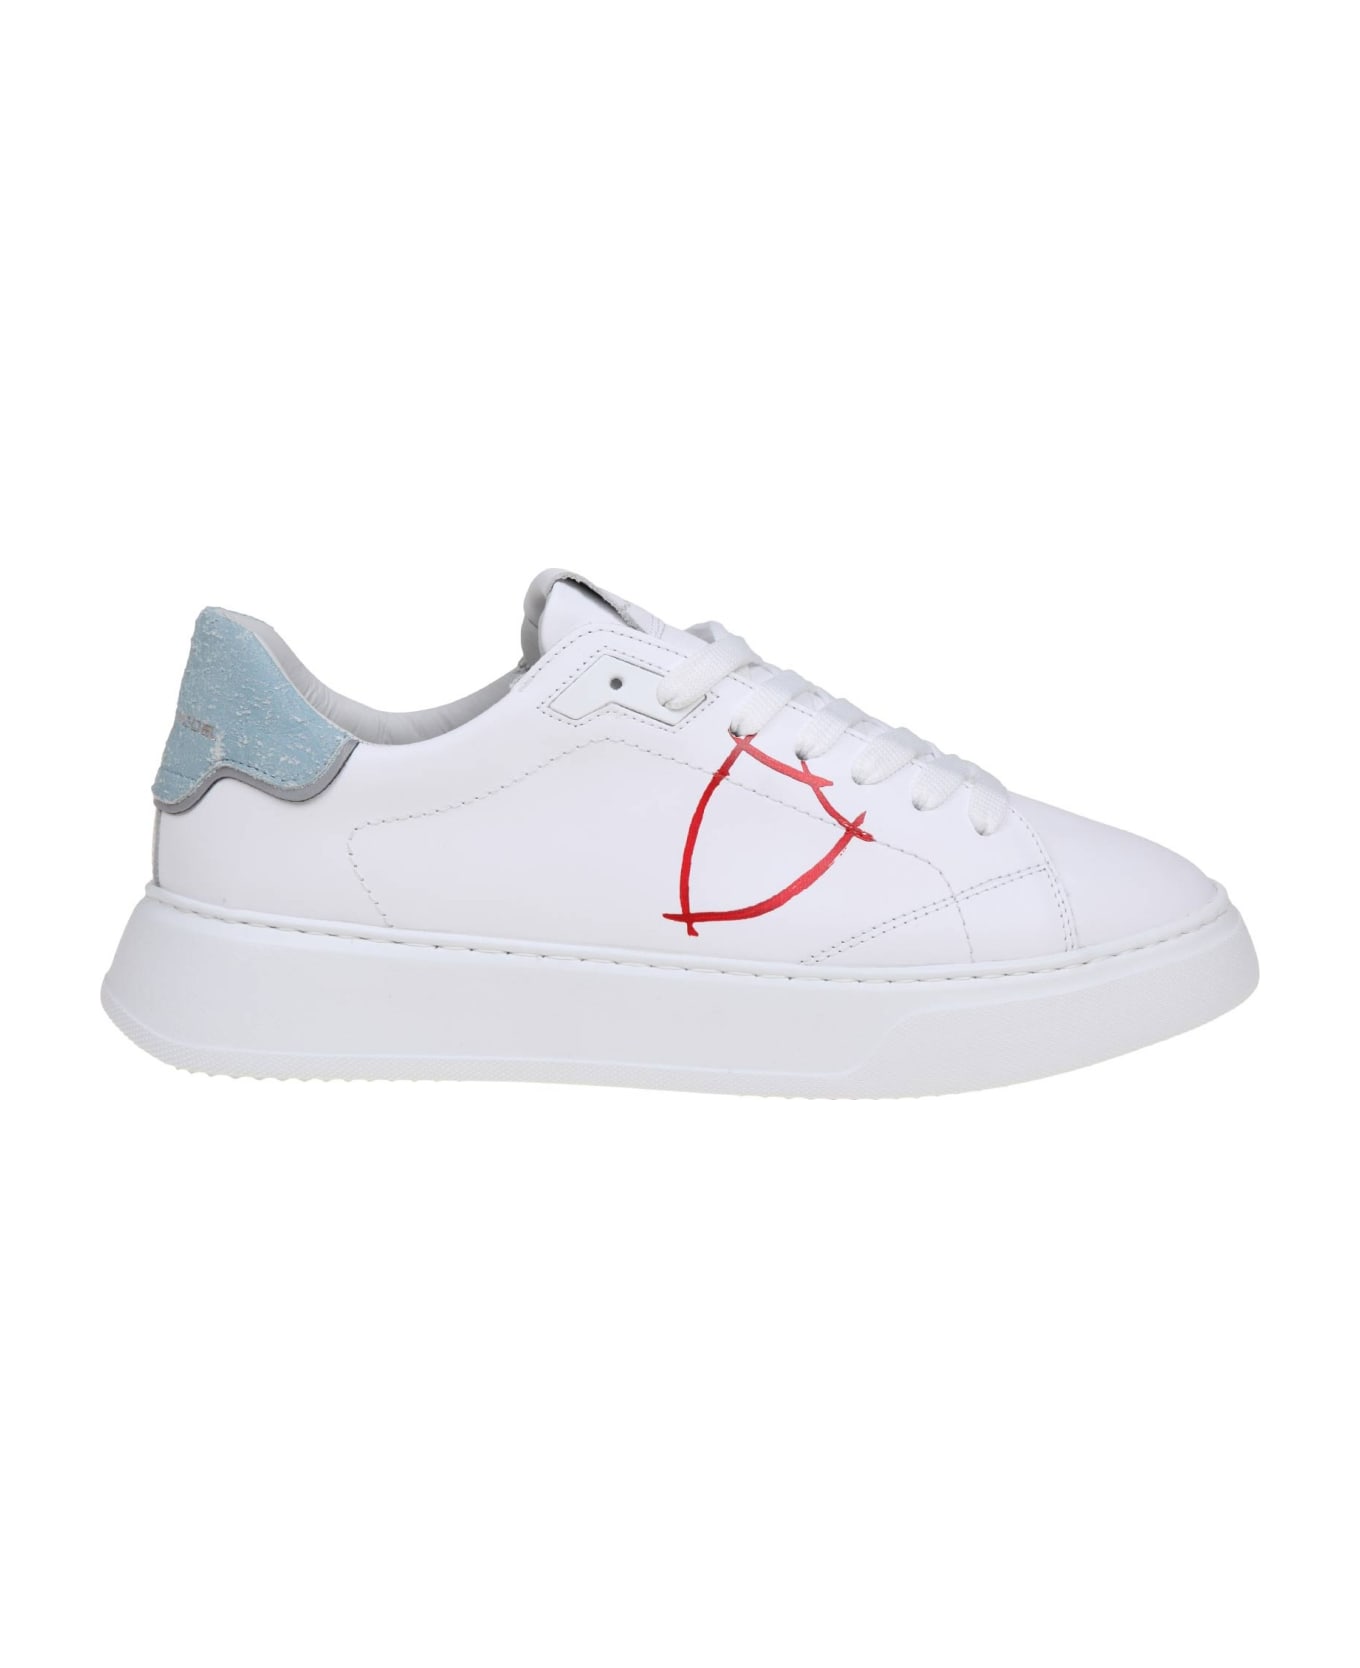 Philippe Model Temple Low Sneakers In White And Light Blue Leather - White/Red スニーカー